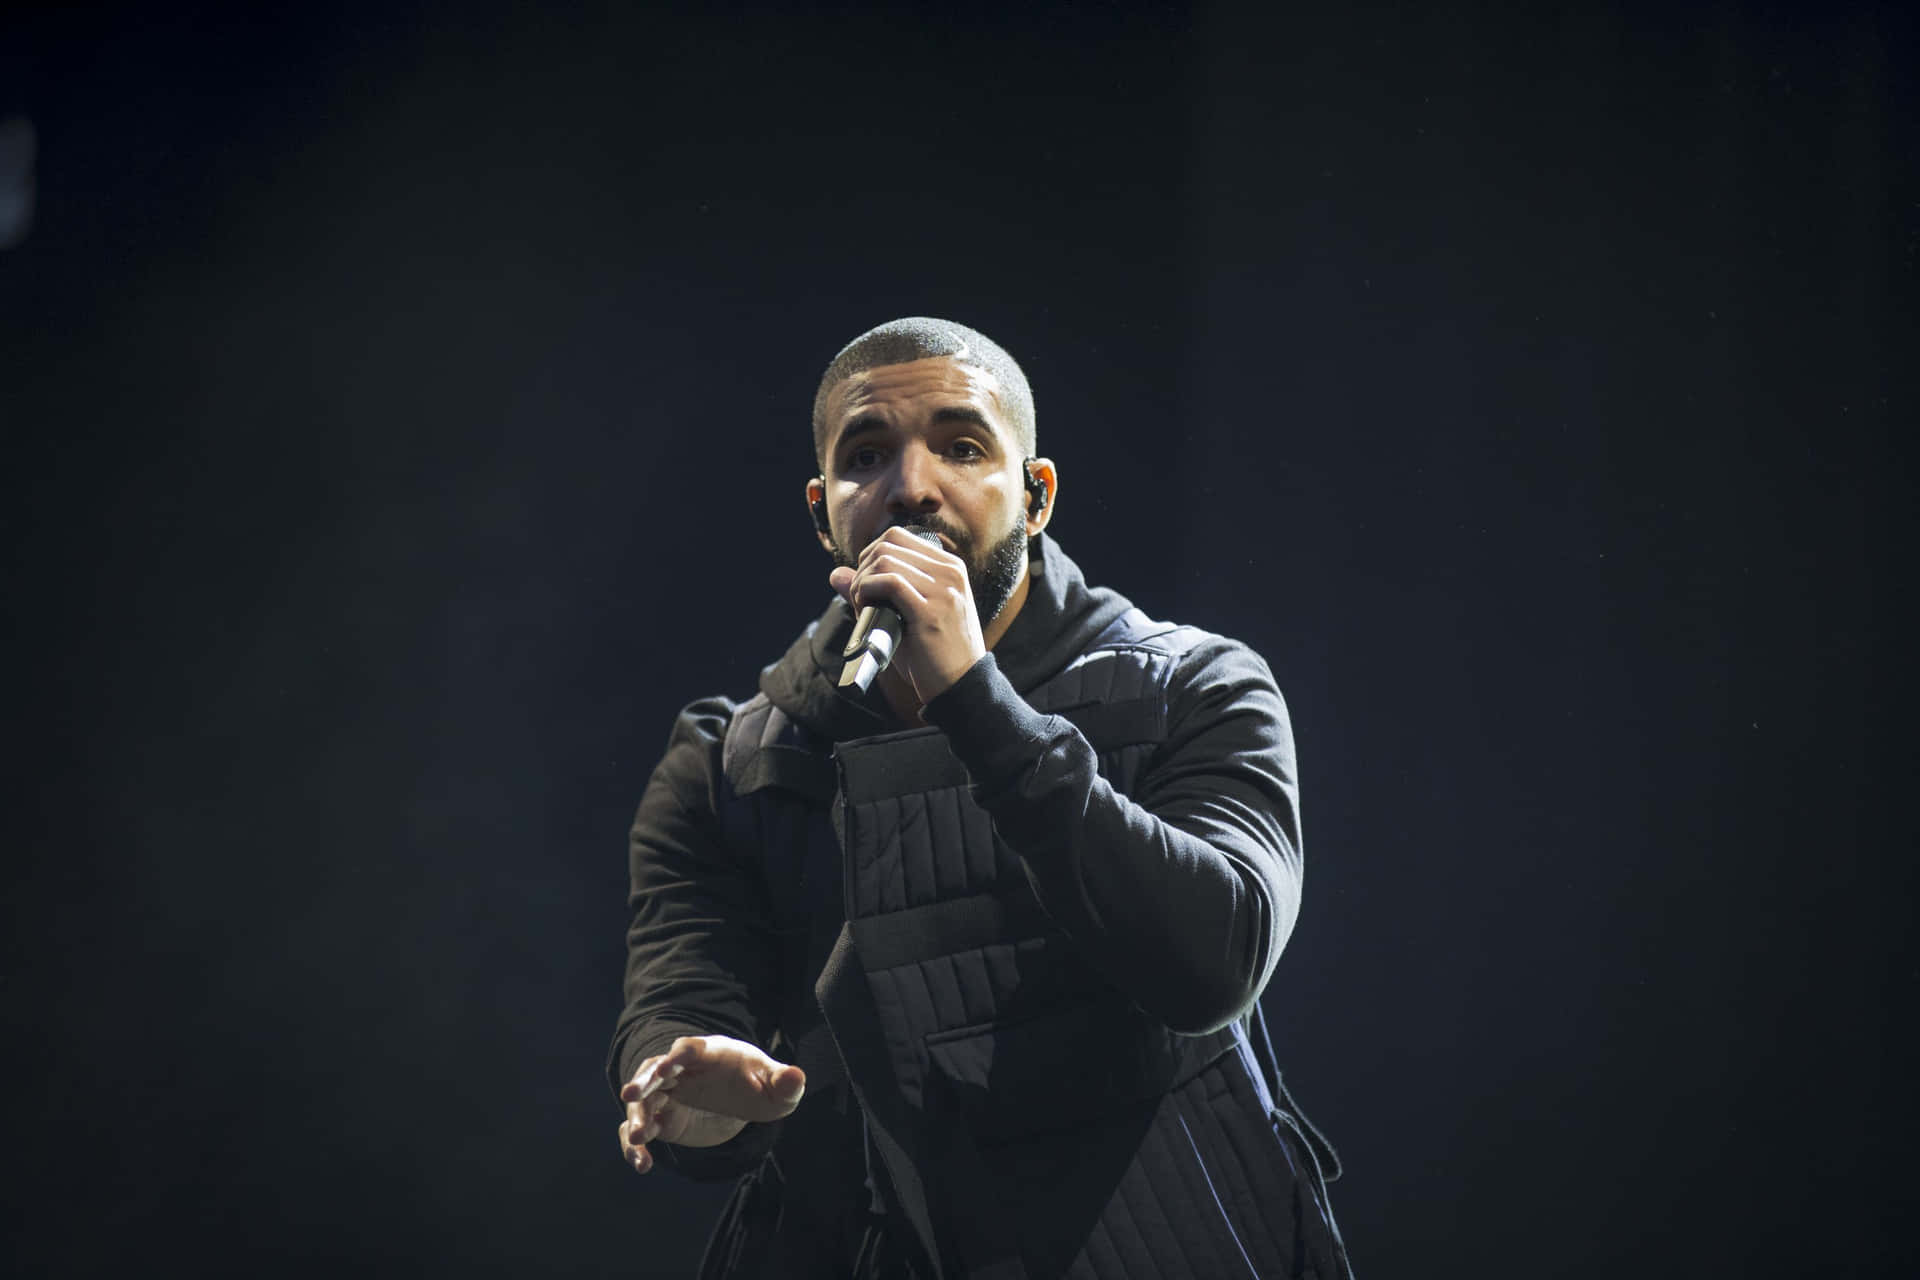 Canadian Rapper Drake performing on stage